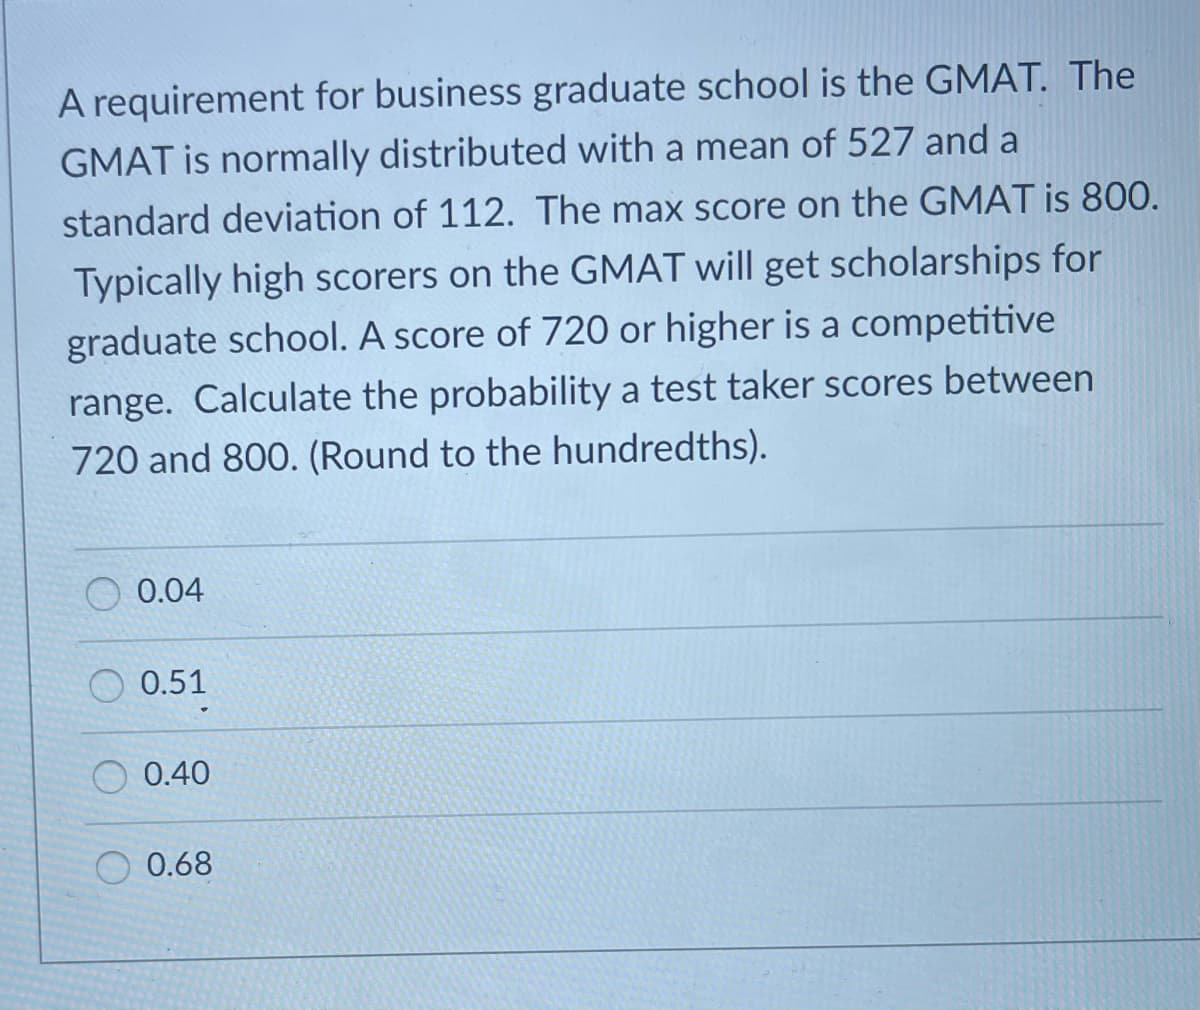 A requirement for business graduate school is the GMAT. The
GMAT is normally distributed with a mean of 527 and a
standard deviation of 112. The max score on the GMAT is 800.
Typically high scorers on the GMAT will get scholarships for
graduate school. A score of 720 or higher is a competitive
range. Calculate the probability a test taker scores between
720 and 800. (Round to the hundredths).
O 0.04
0.51
O 0.40
0.68
